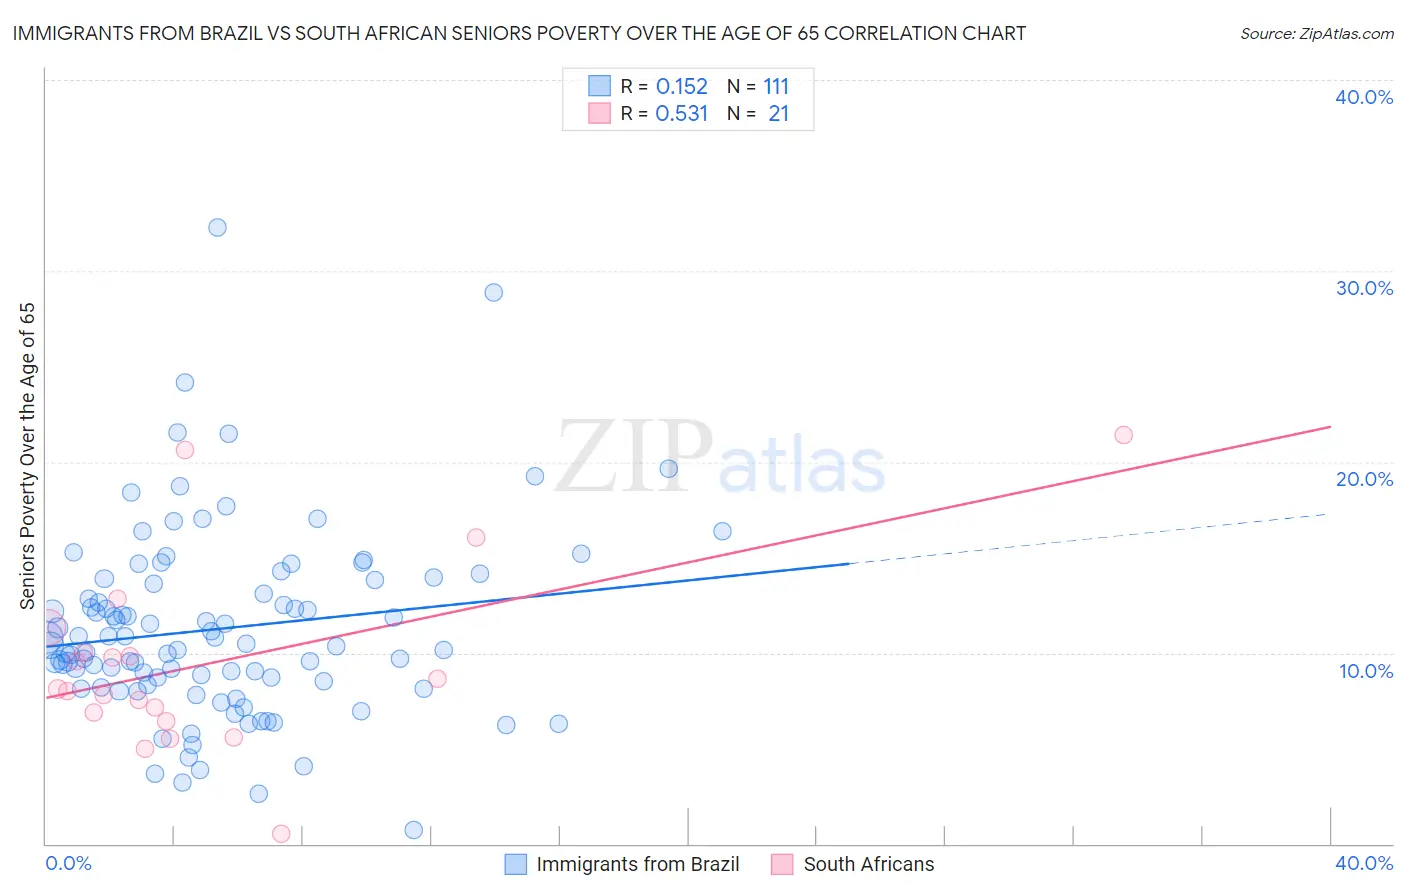 Immigrants from Brazil vs South African Seniors Poverty Over the Age of 65